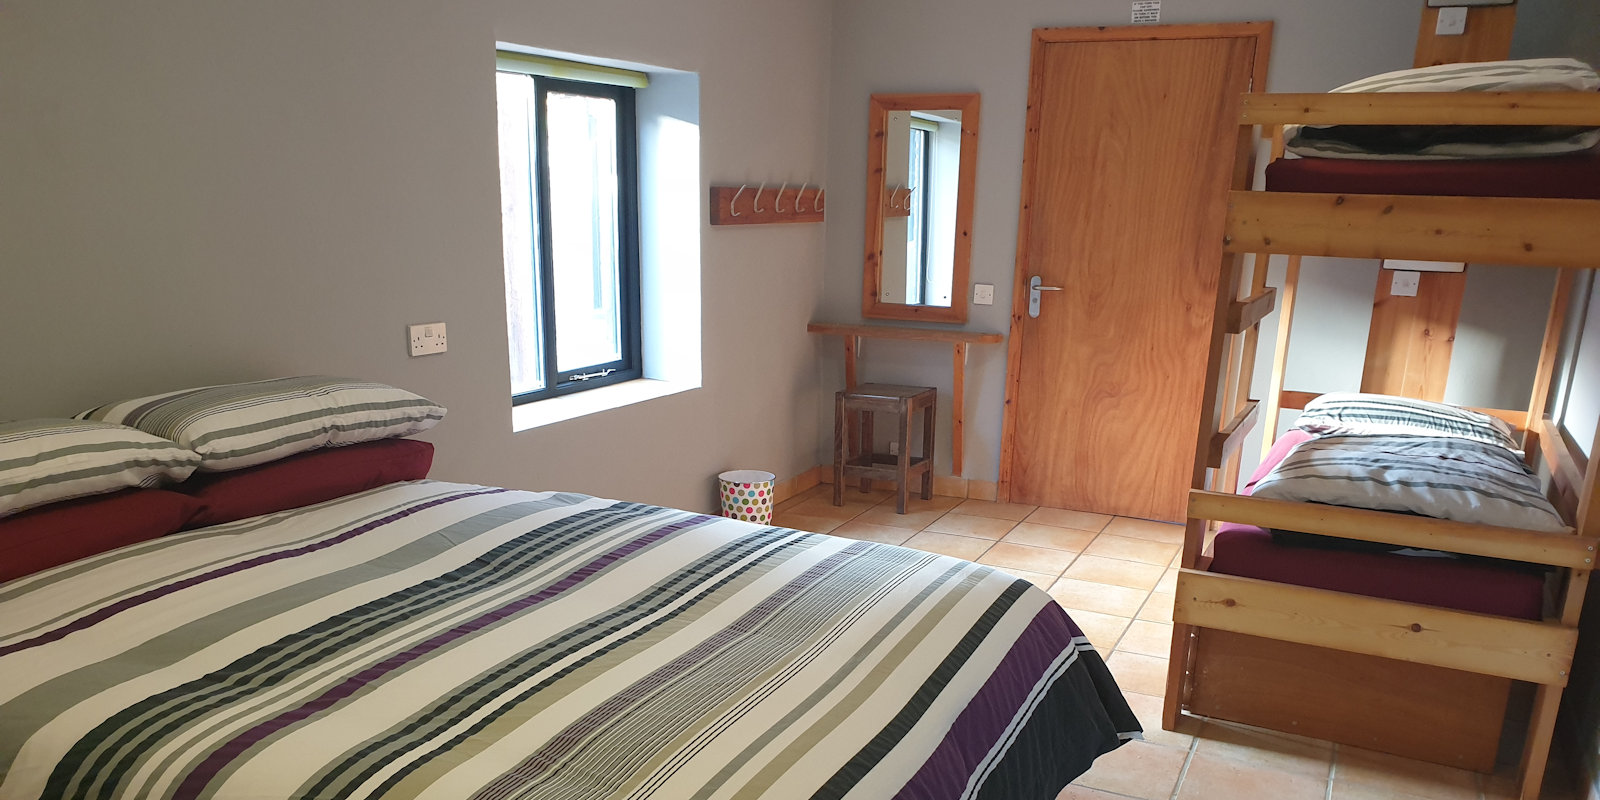 Deepdale Private Rooms, lovely ensuite & shared facility rooms with self-catering facilities.  Double, twin, triple, quad, family & small group rooms.  The perfect base to enjoy the big skies, countryside and coastline of the beautiful North Norfolk Coast. - Deepdale Camping & Rooms